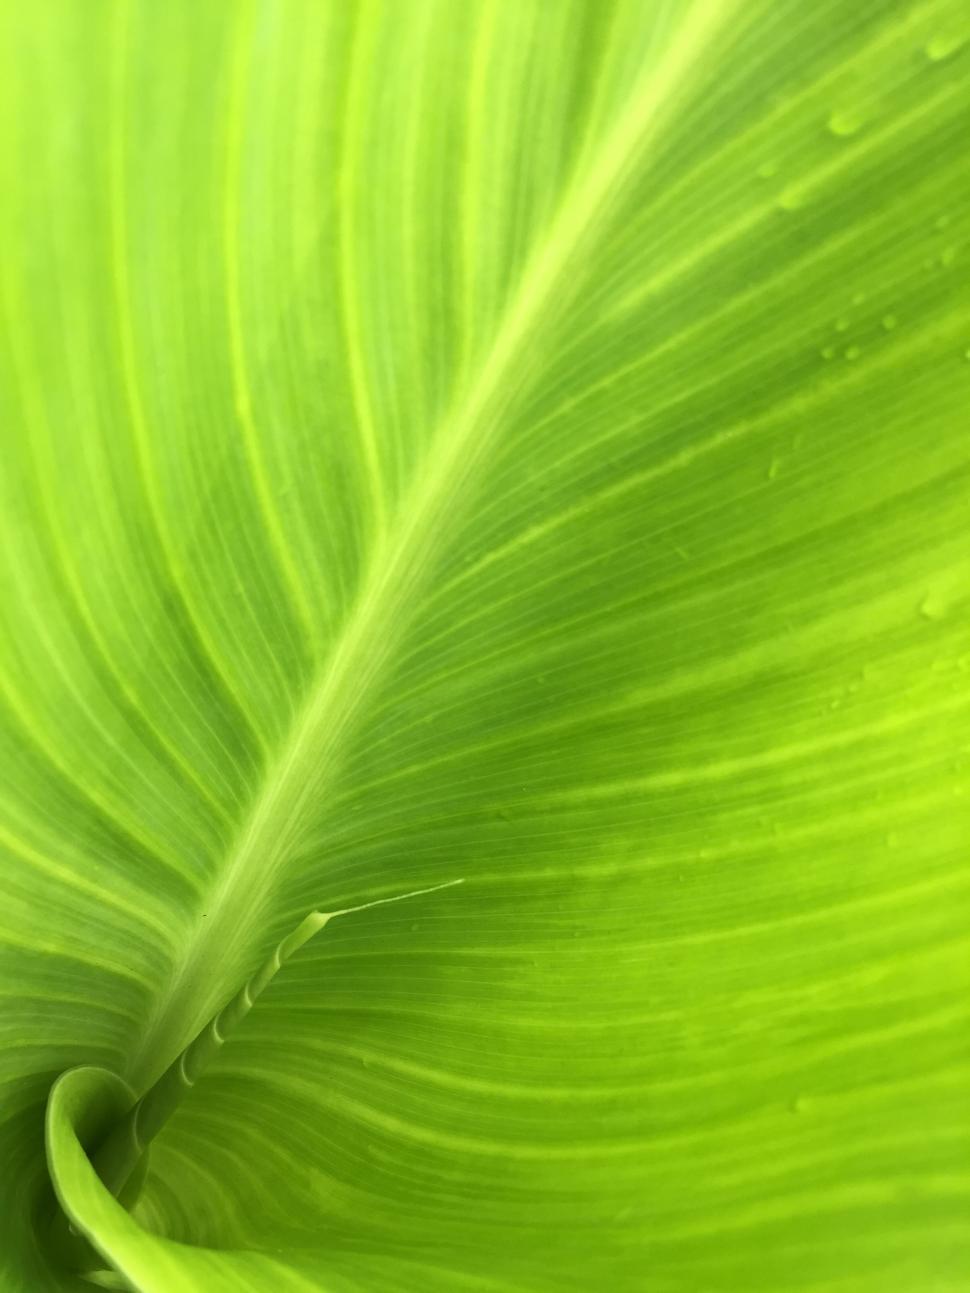 Download Free Stock Photo of Green leaf with veins  